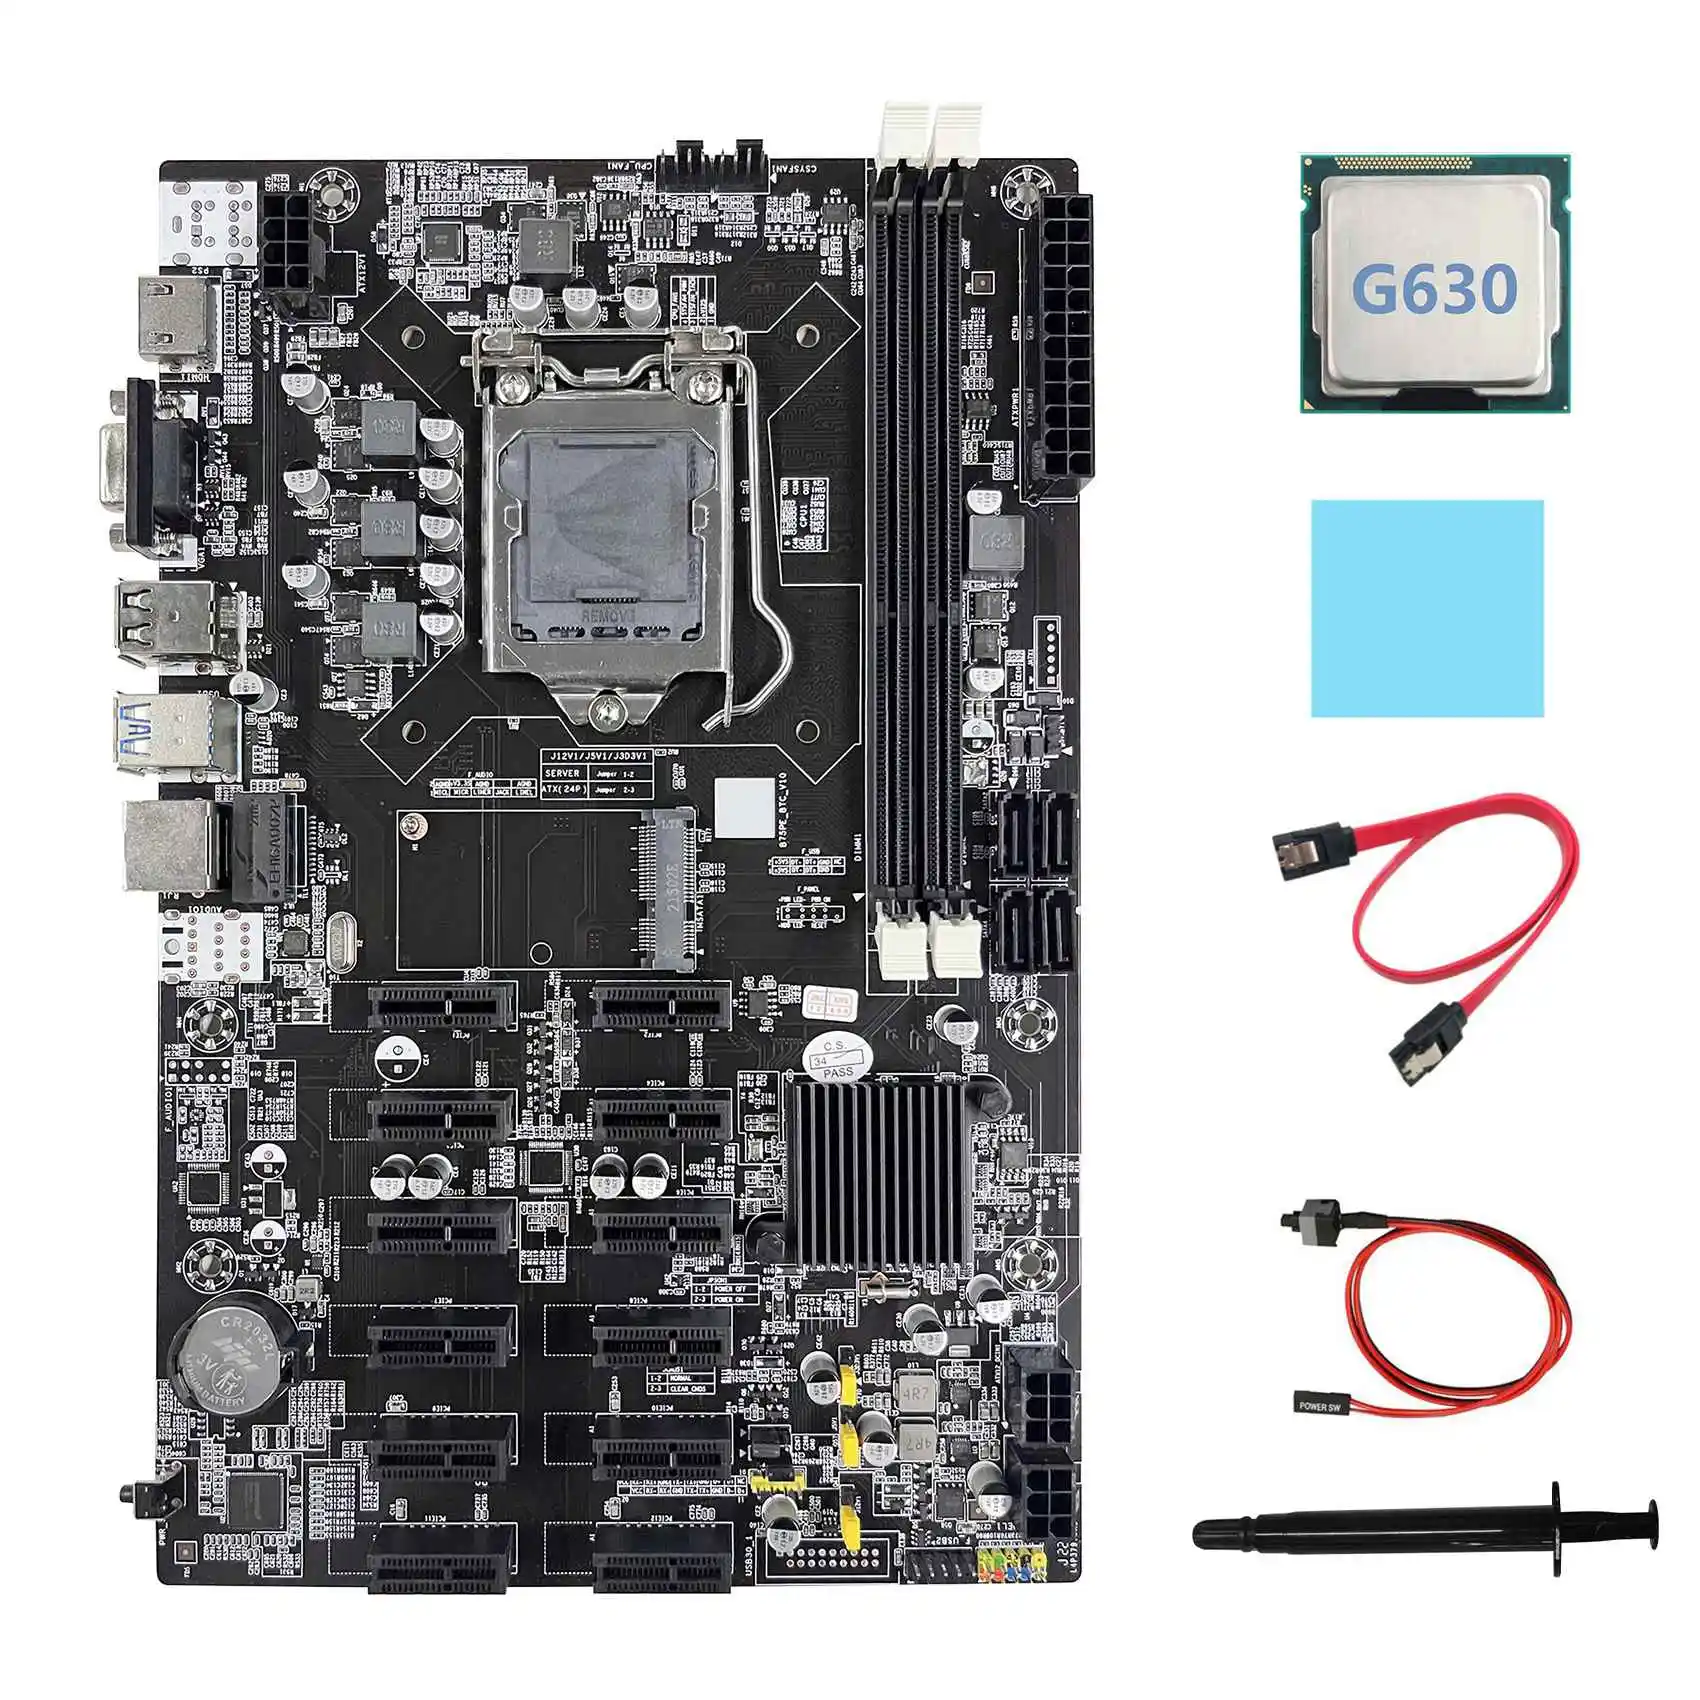 B75 12 PCIE ETH Mining Motherboard+G630 CPU+SATA Cable+Switch Cable+Thermal Pad+Thermal Grease BTC Miner Motherboard